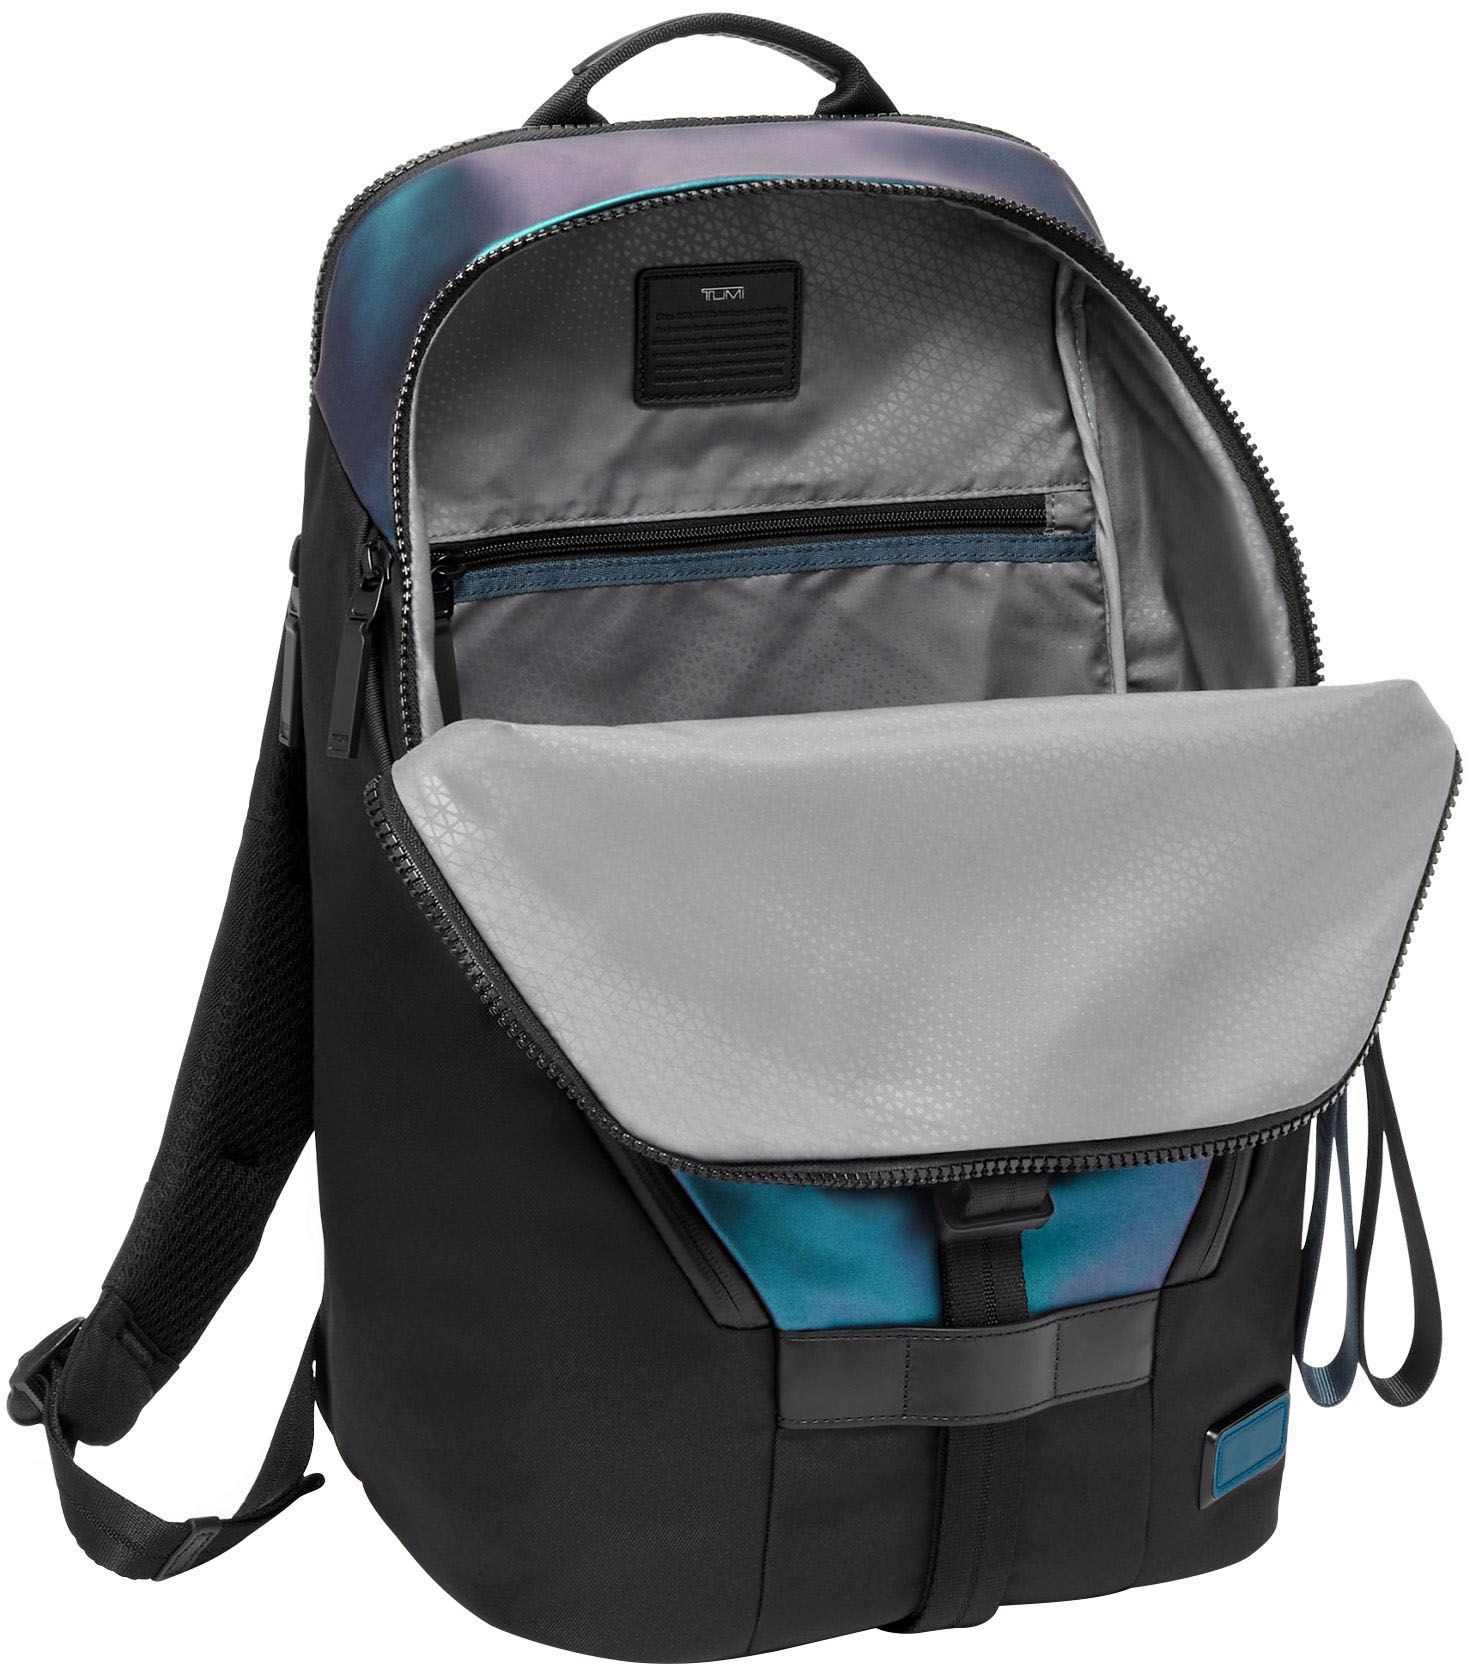 Angle View: TUMI - Tahoe Finch Backpack - Blue